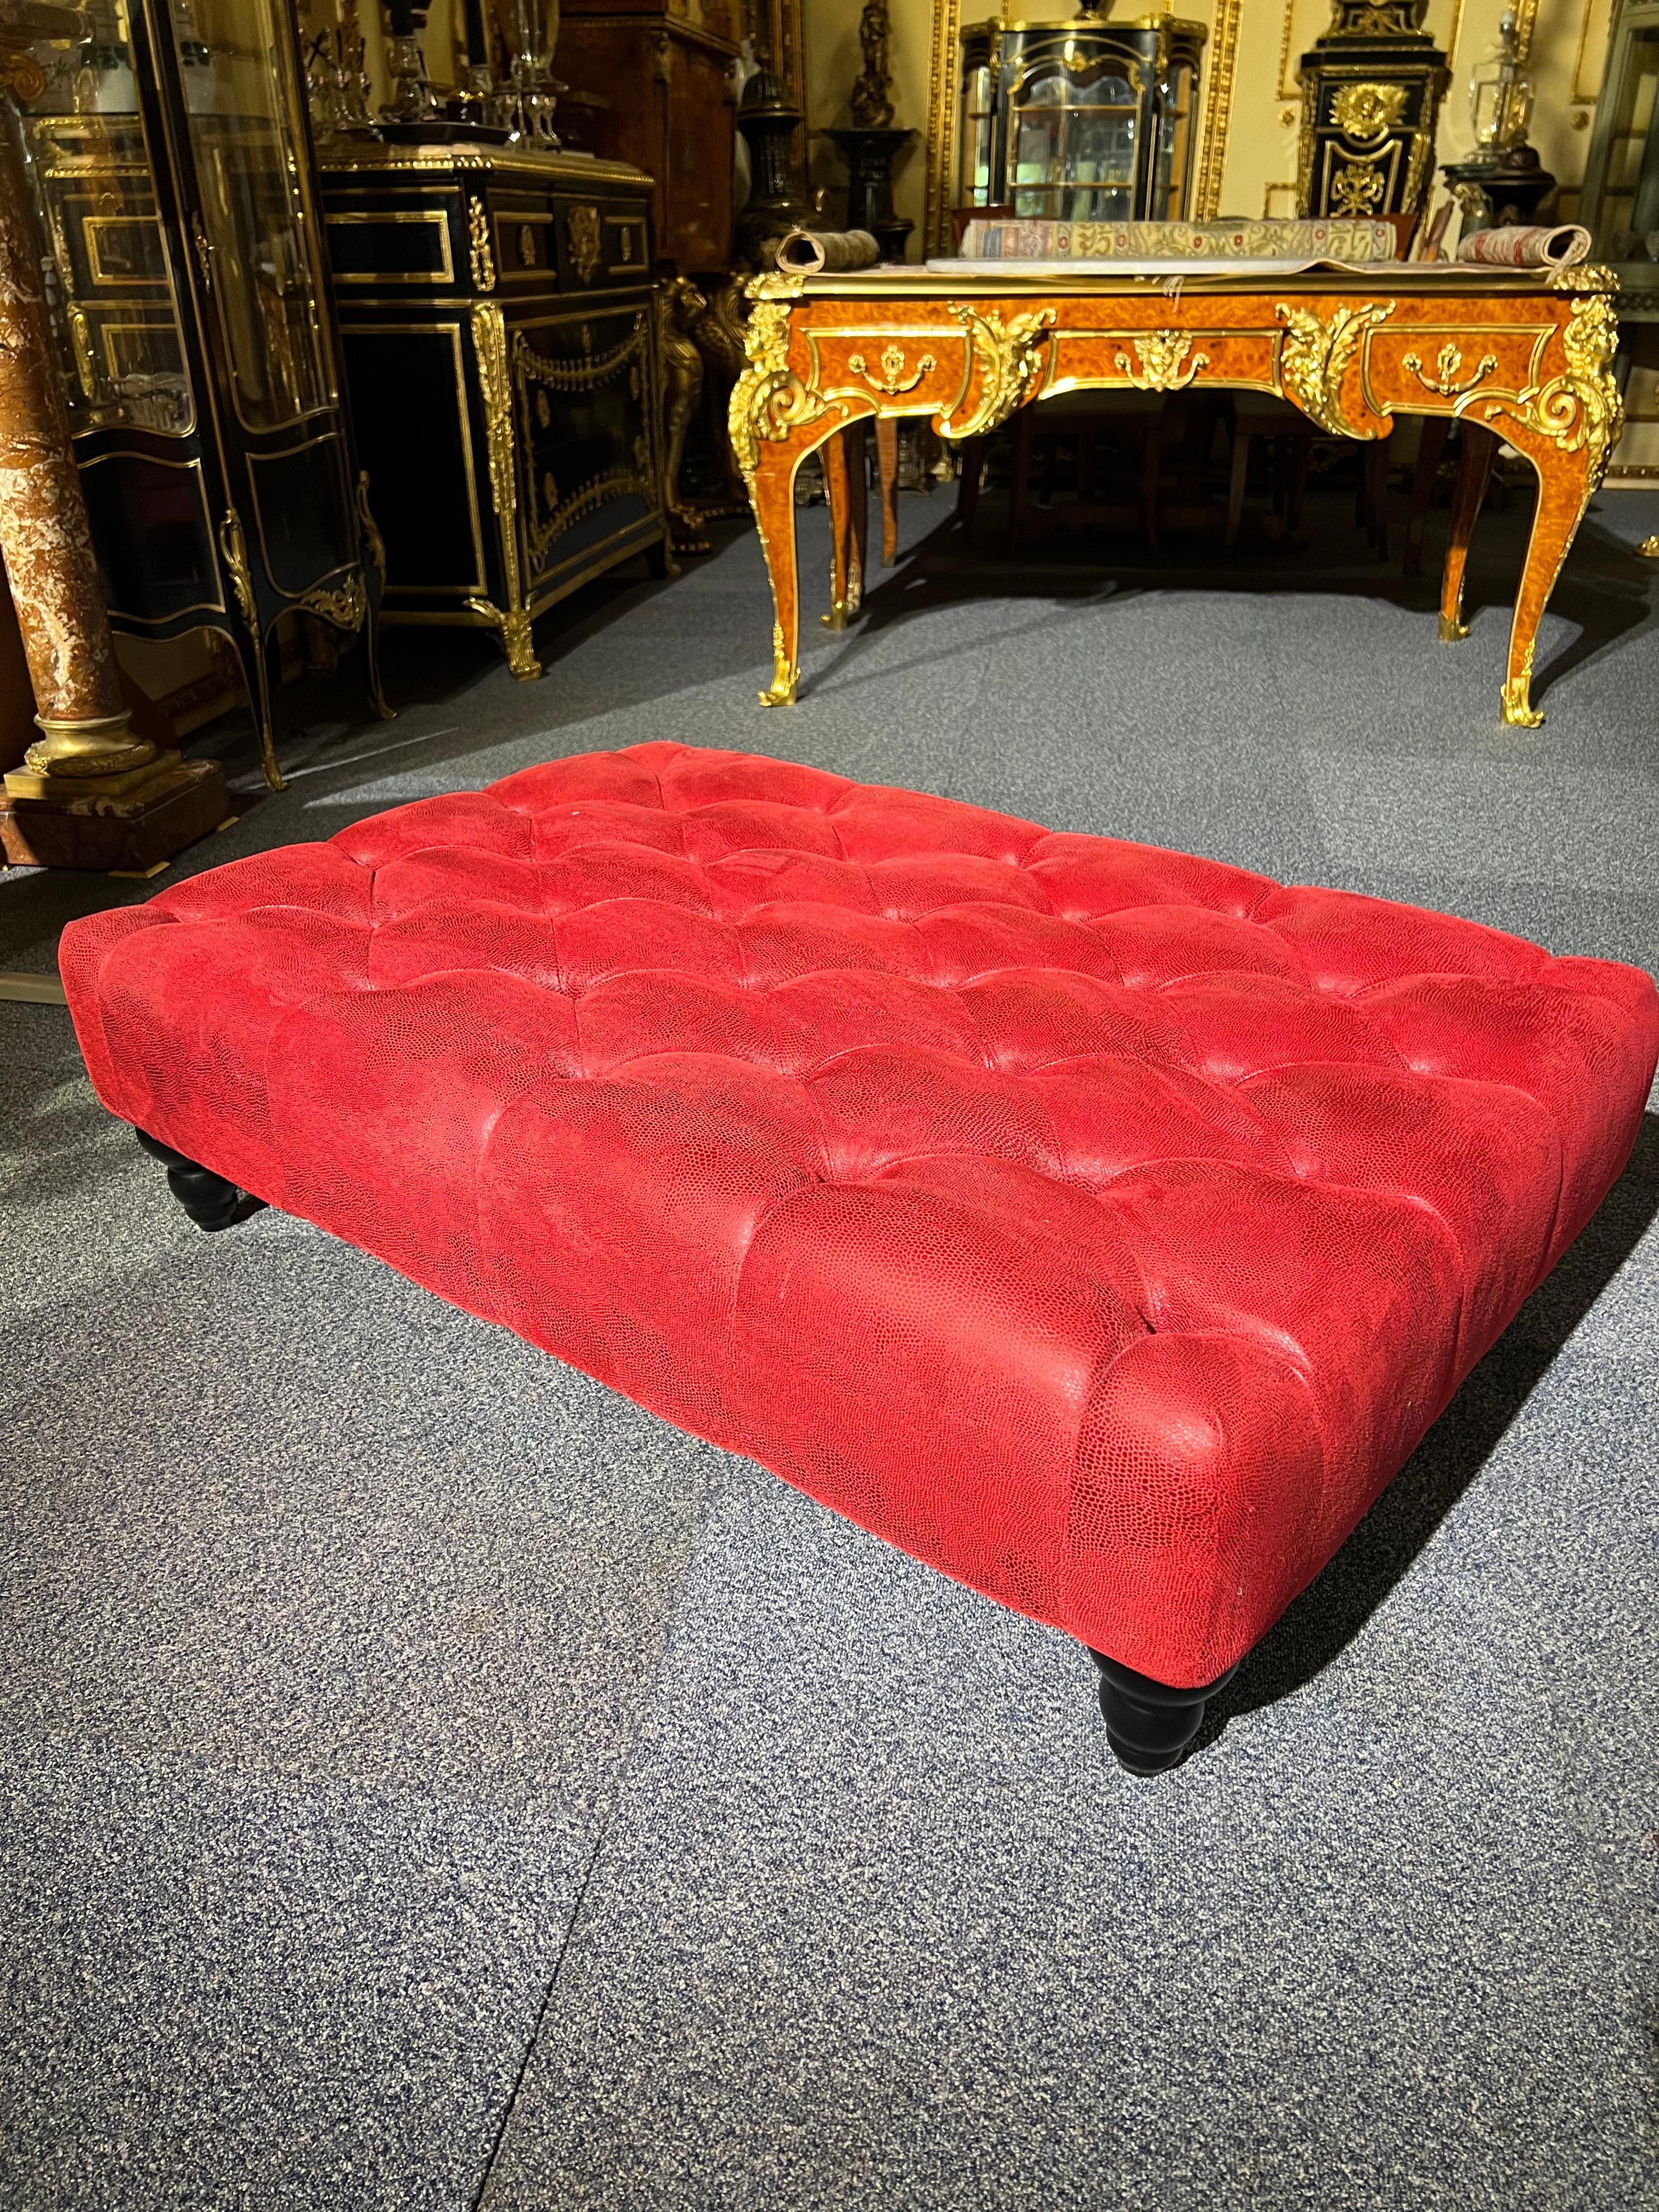 Sofa / Couch Chesterfield Luxury Baroque Style Design Velvet Red Alcantara Look For Sale 5